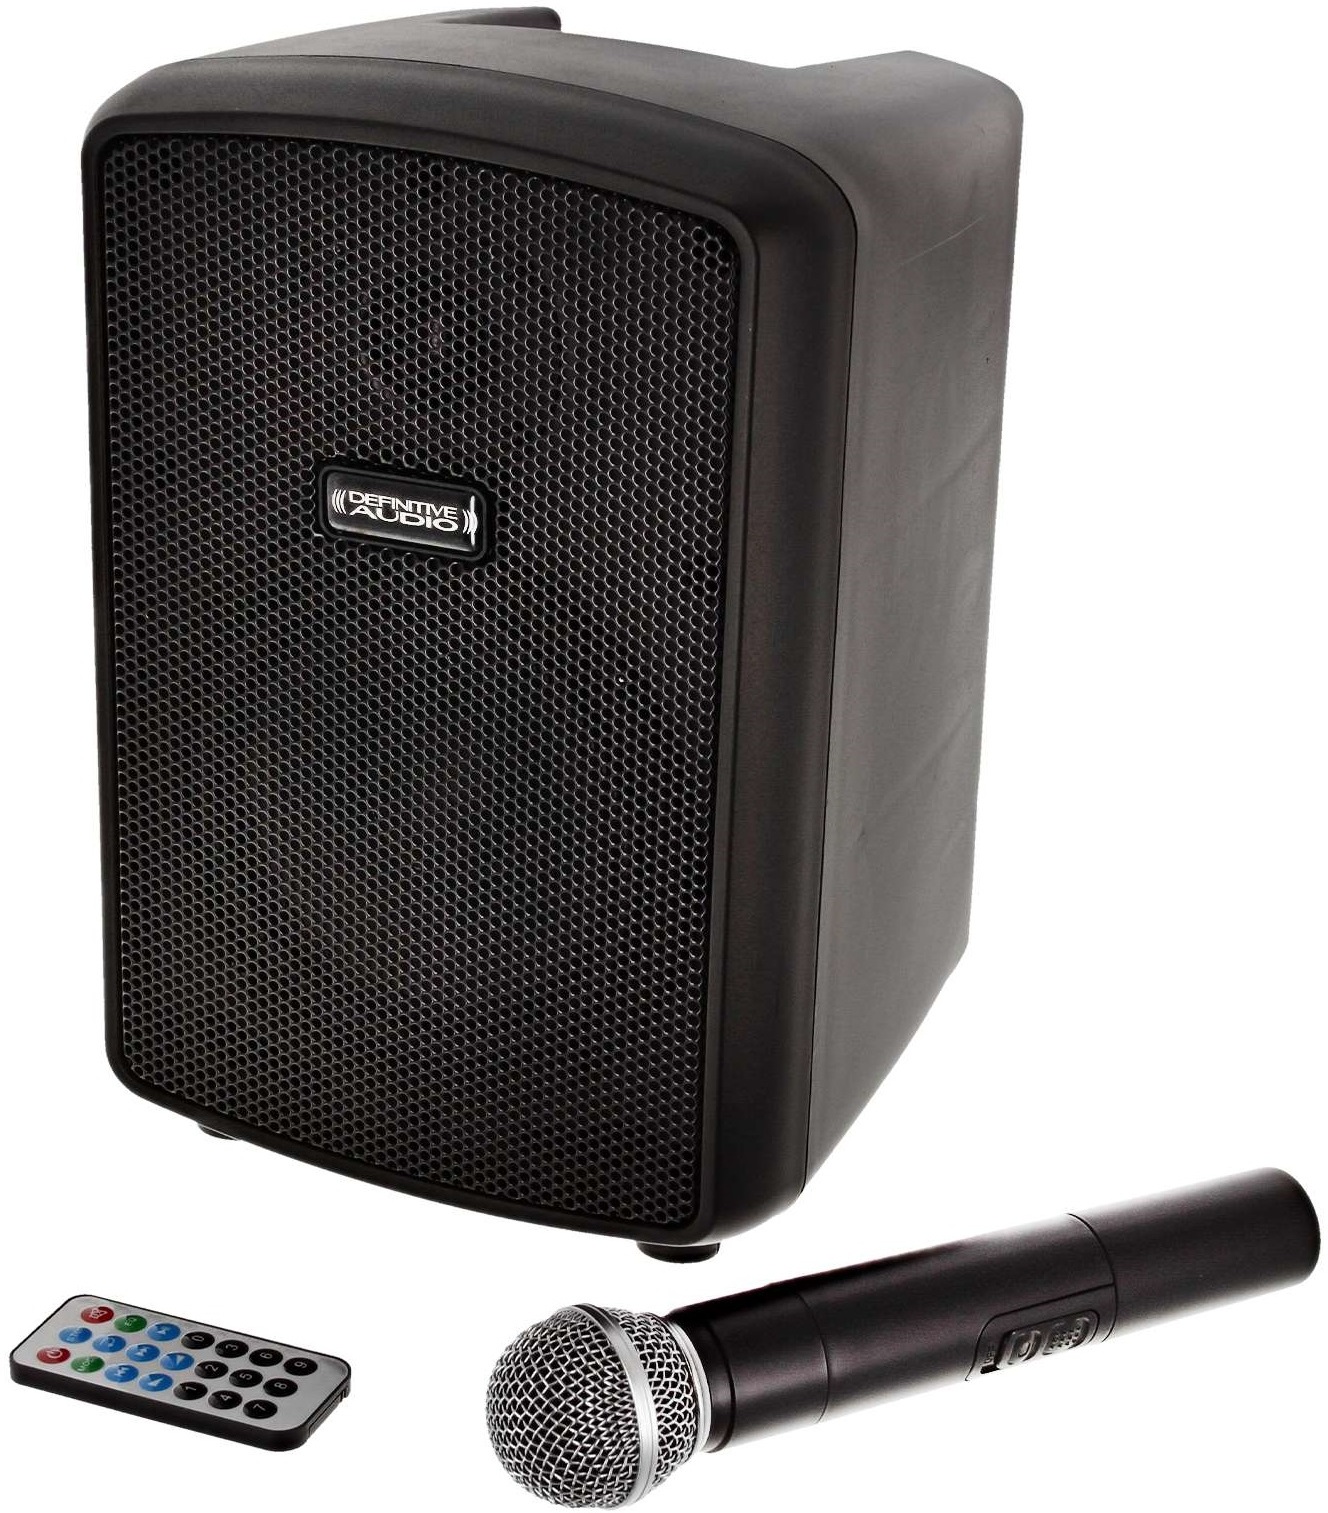 Definitive Audio Rush One - Portable PA system - Main picture